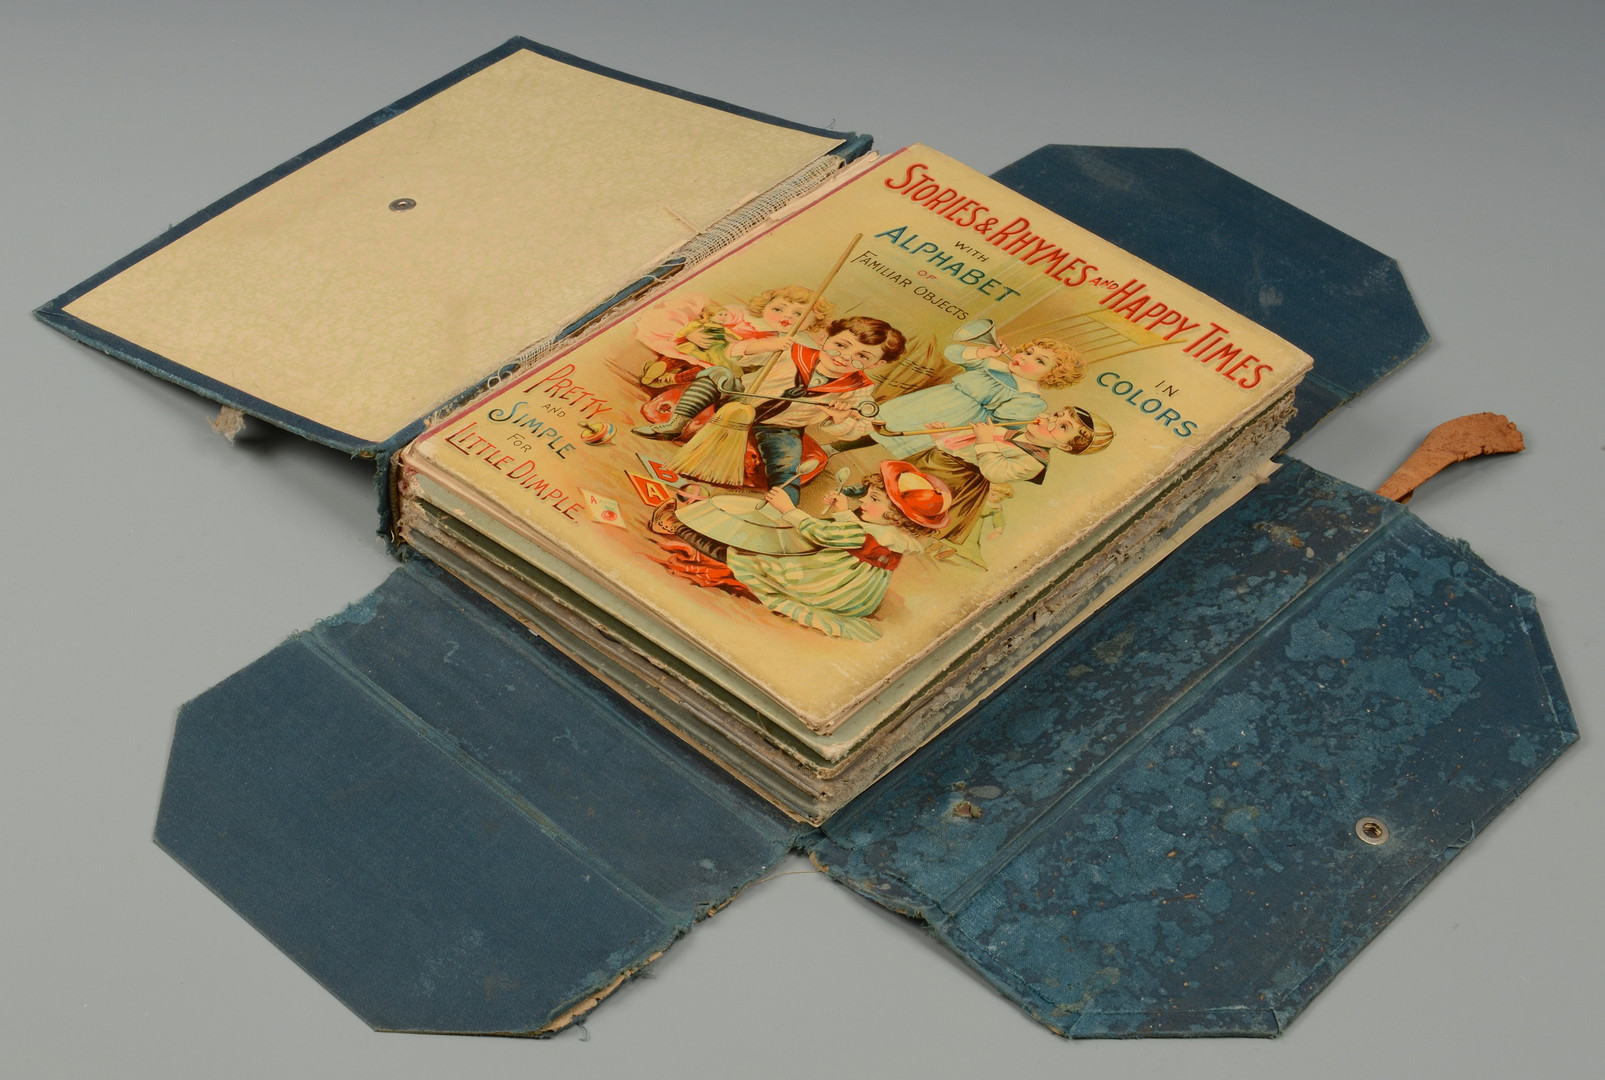 Lot 643: Collection of Children's Books & Games